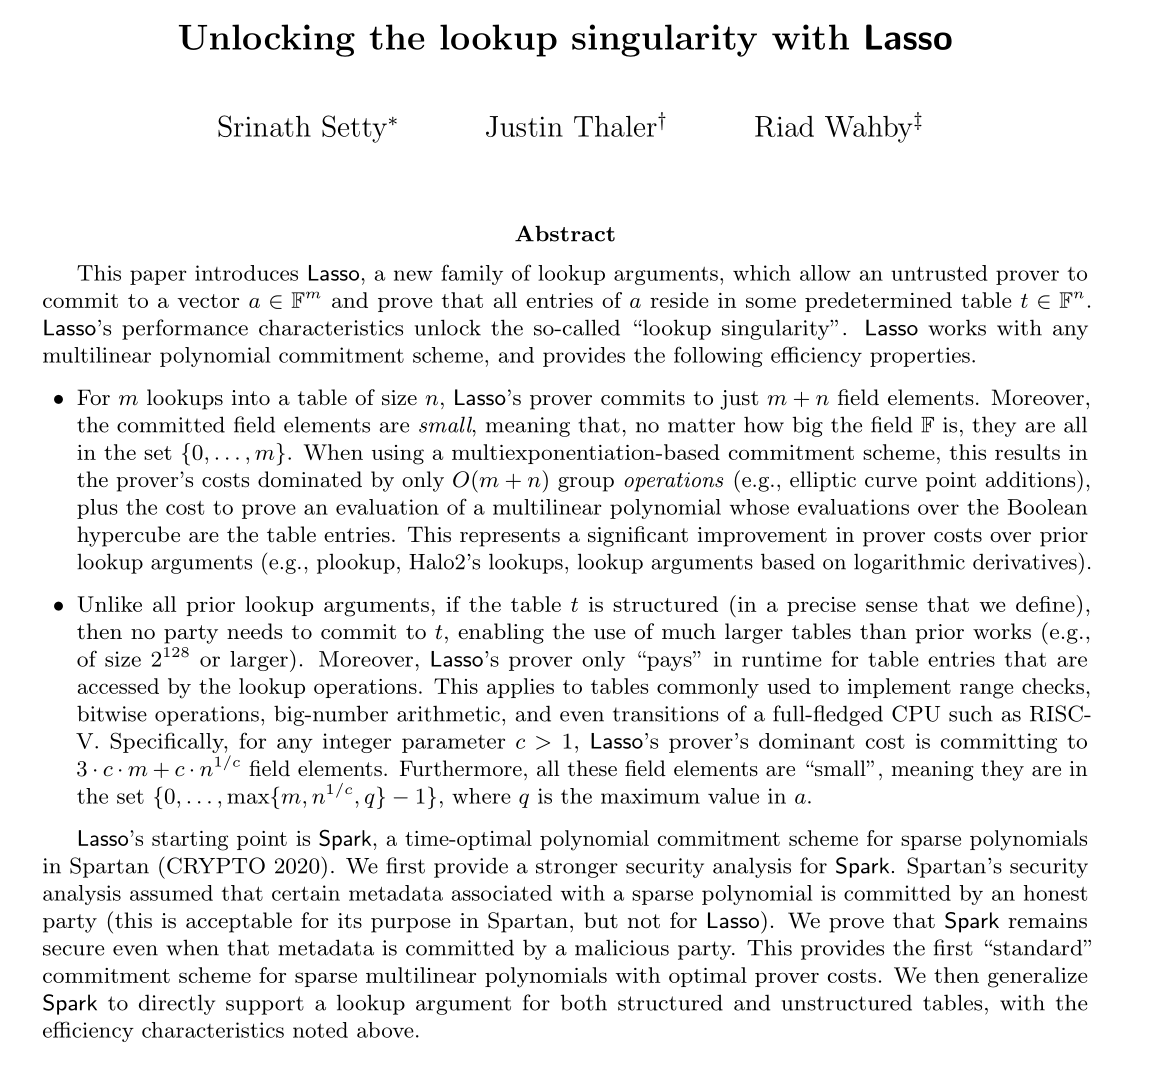 Introducing Lasso, a new lookup argument that unlocks 'lookup singularity' by building on Spartan's sparse polynomial commitment ('Spark'). Appearing on eprint shortly! Joint work with @SuccinctJT and Riad Wahby.